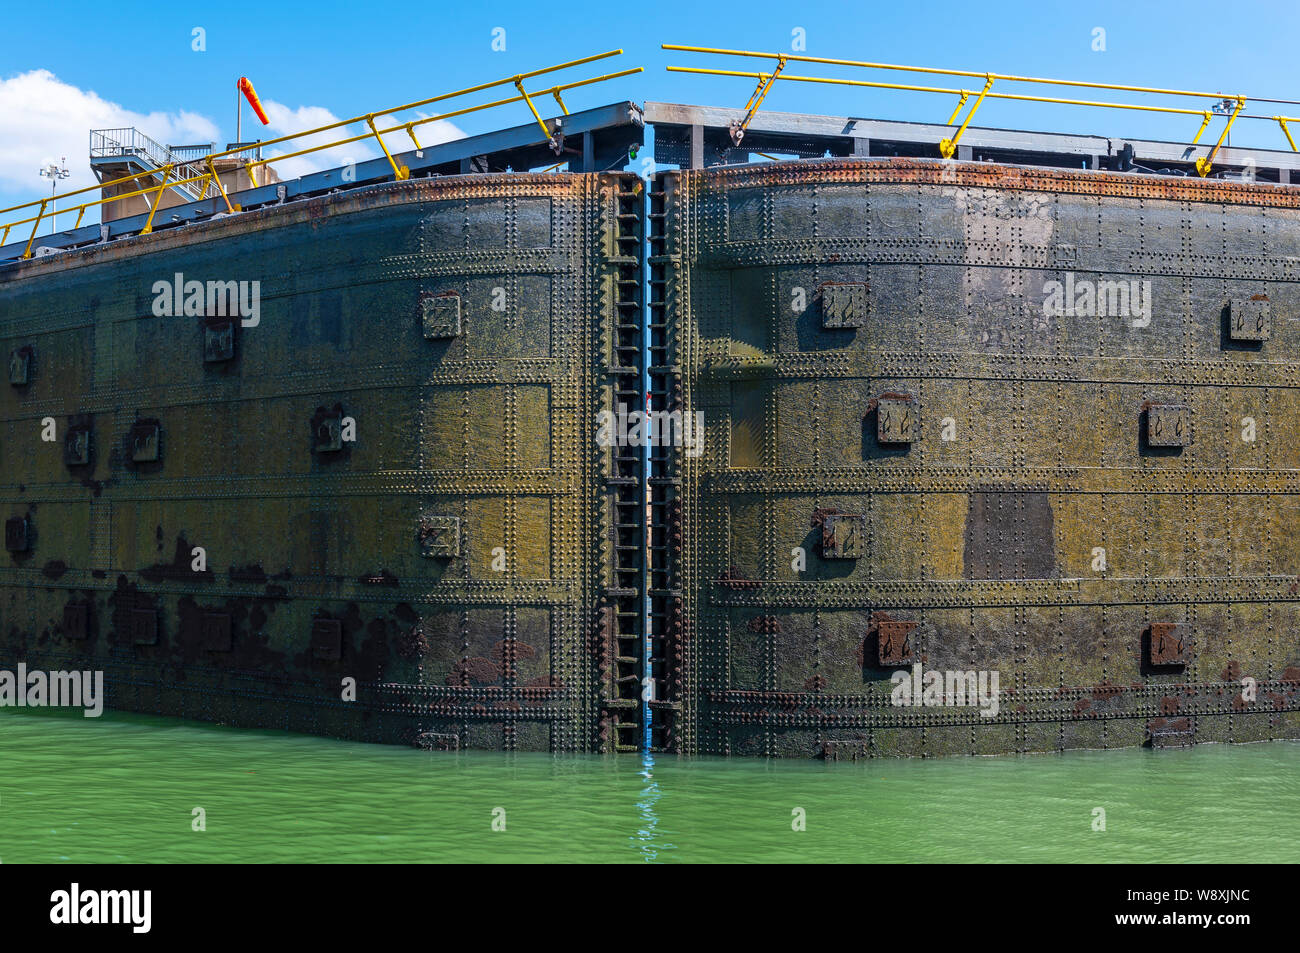 A closed gate of the Miraflores locks along a cruise of the Panama Canal near Panama City, Central America. Stock Photo